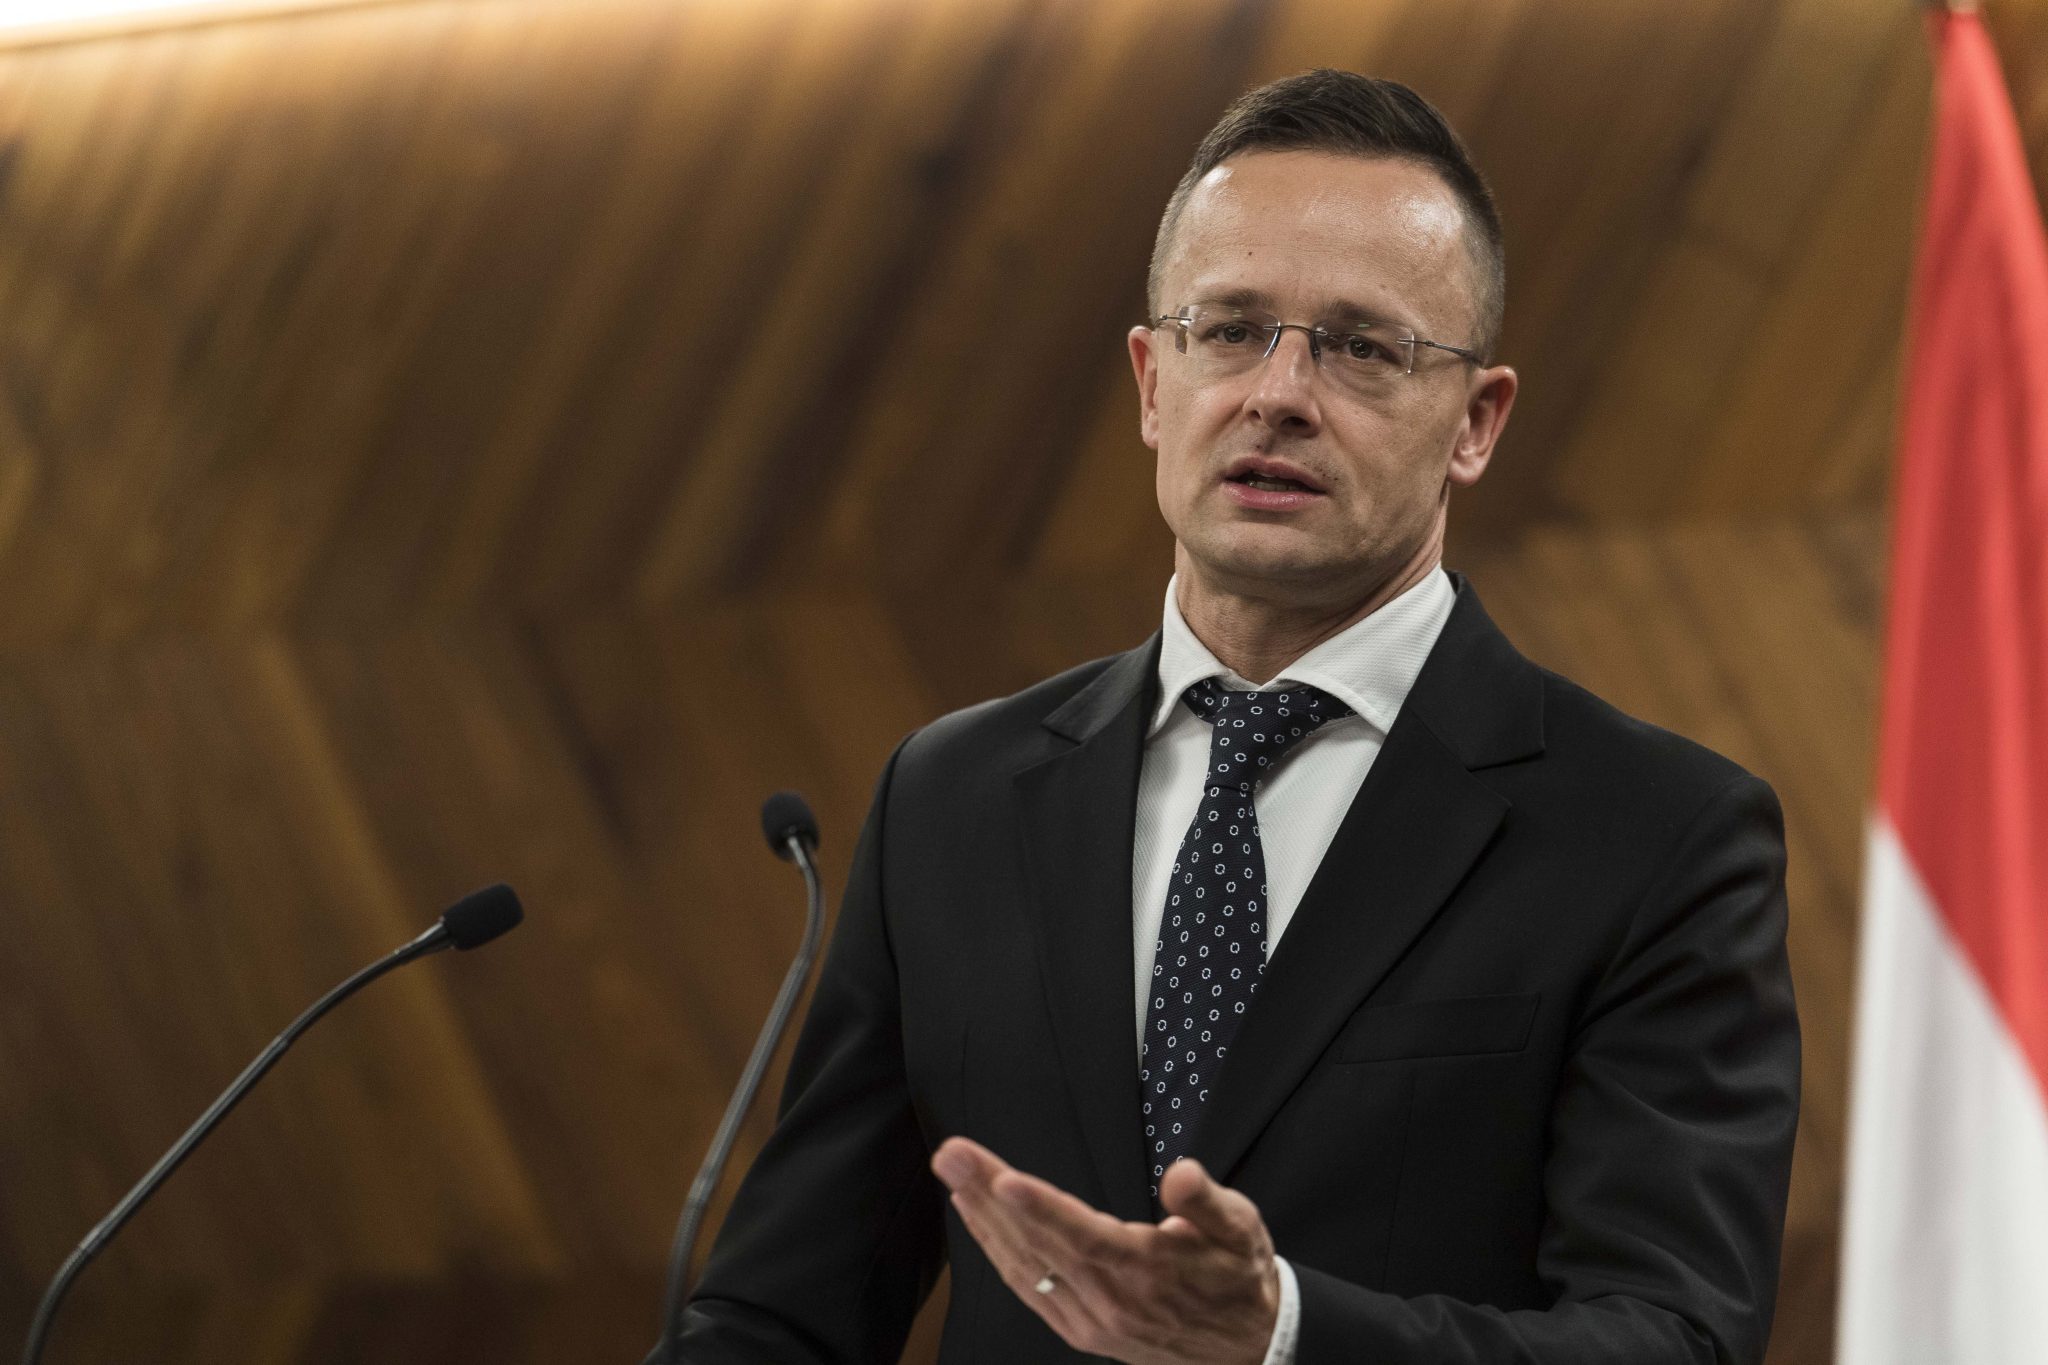 Szijjártó on EPP: 'We Wouldn't Like to Belong to a Pro-migration Party  Alliance that Defames European Values' - Hungary Today